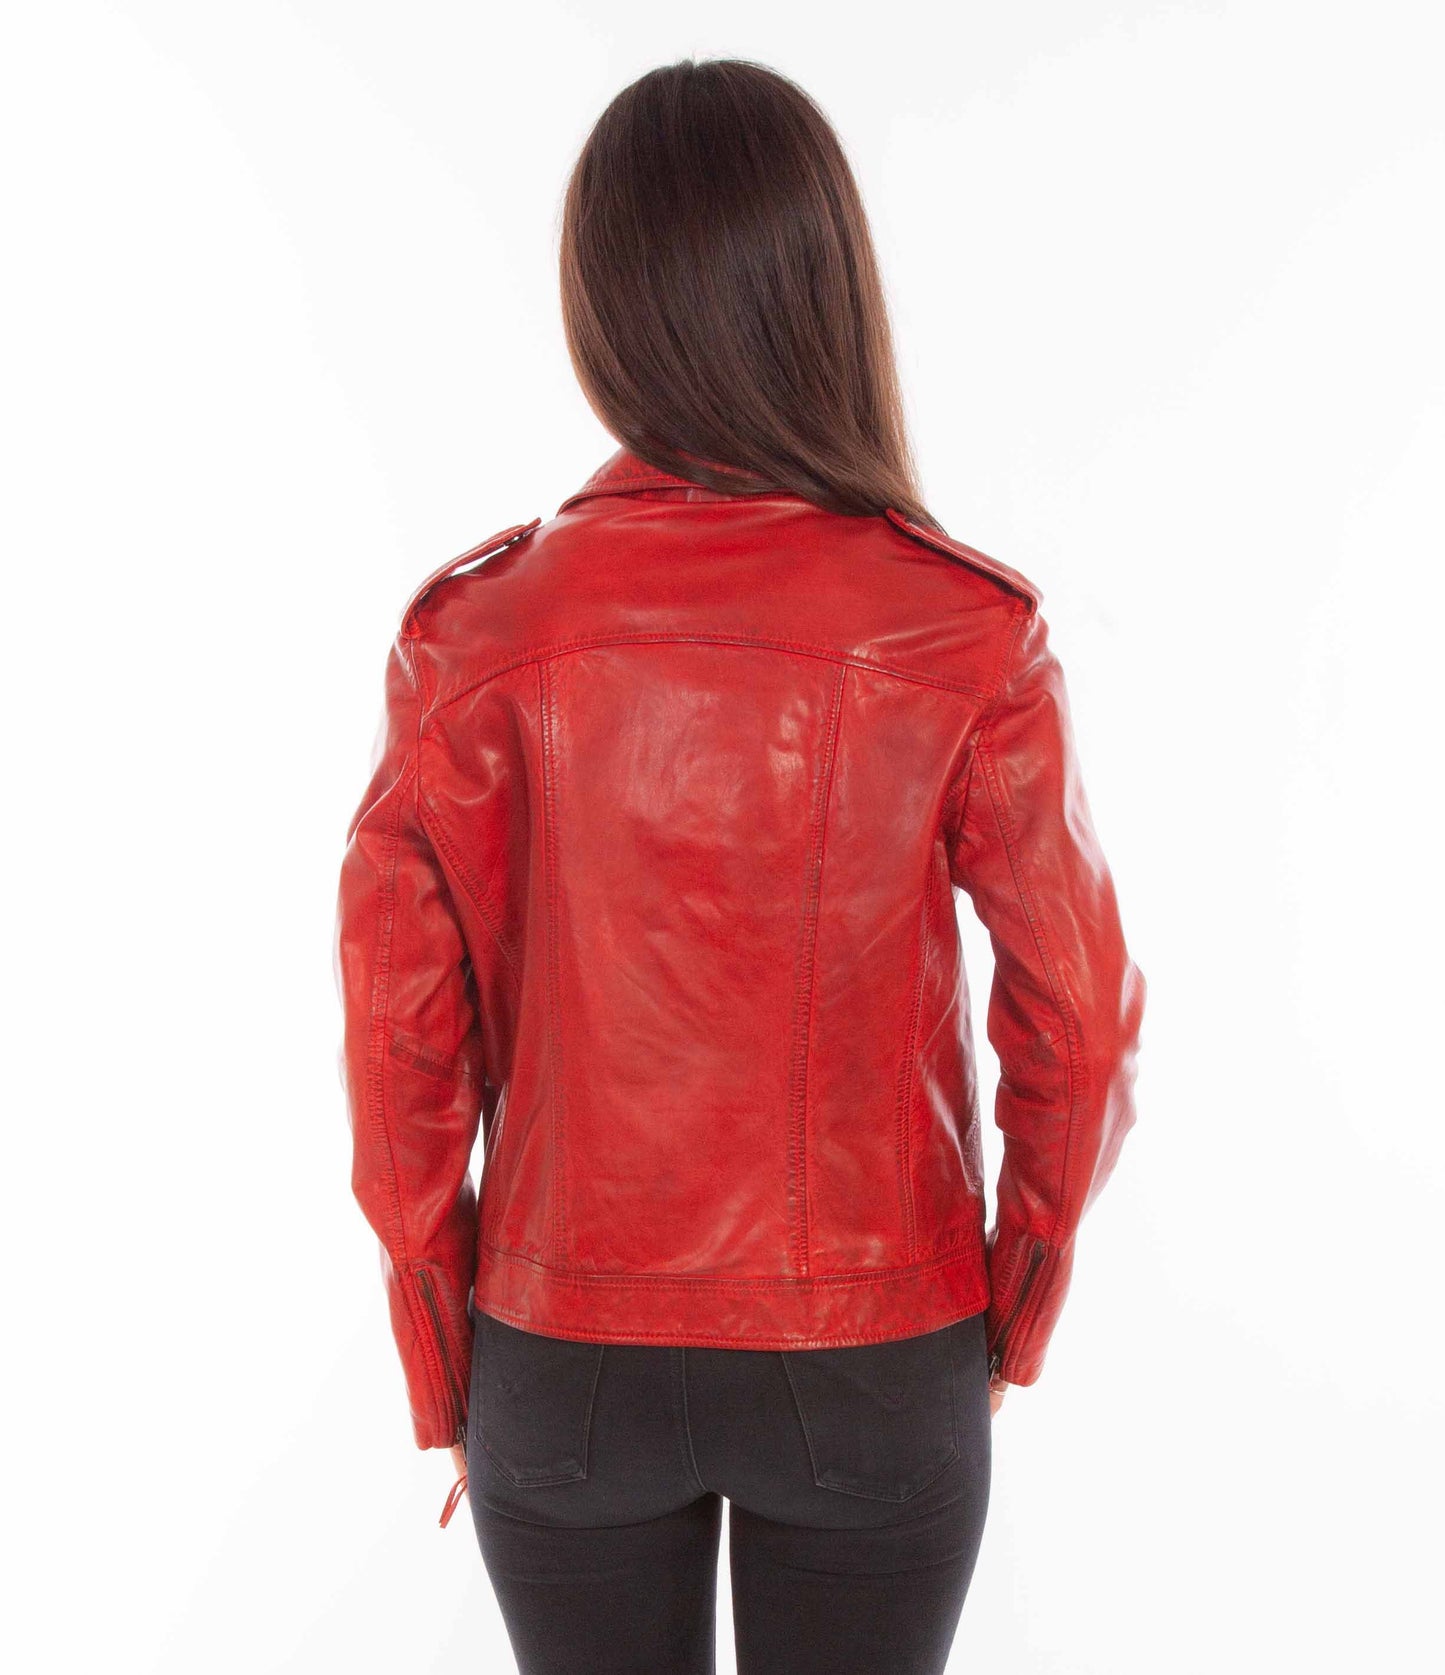 Vintage Red Leather Motorcycle Jacket at Bourbon Cowgirl